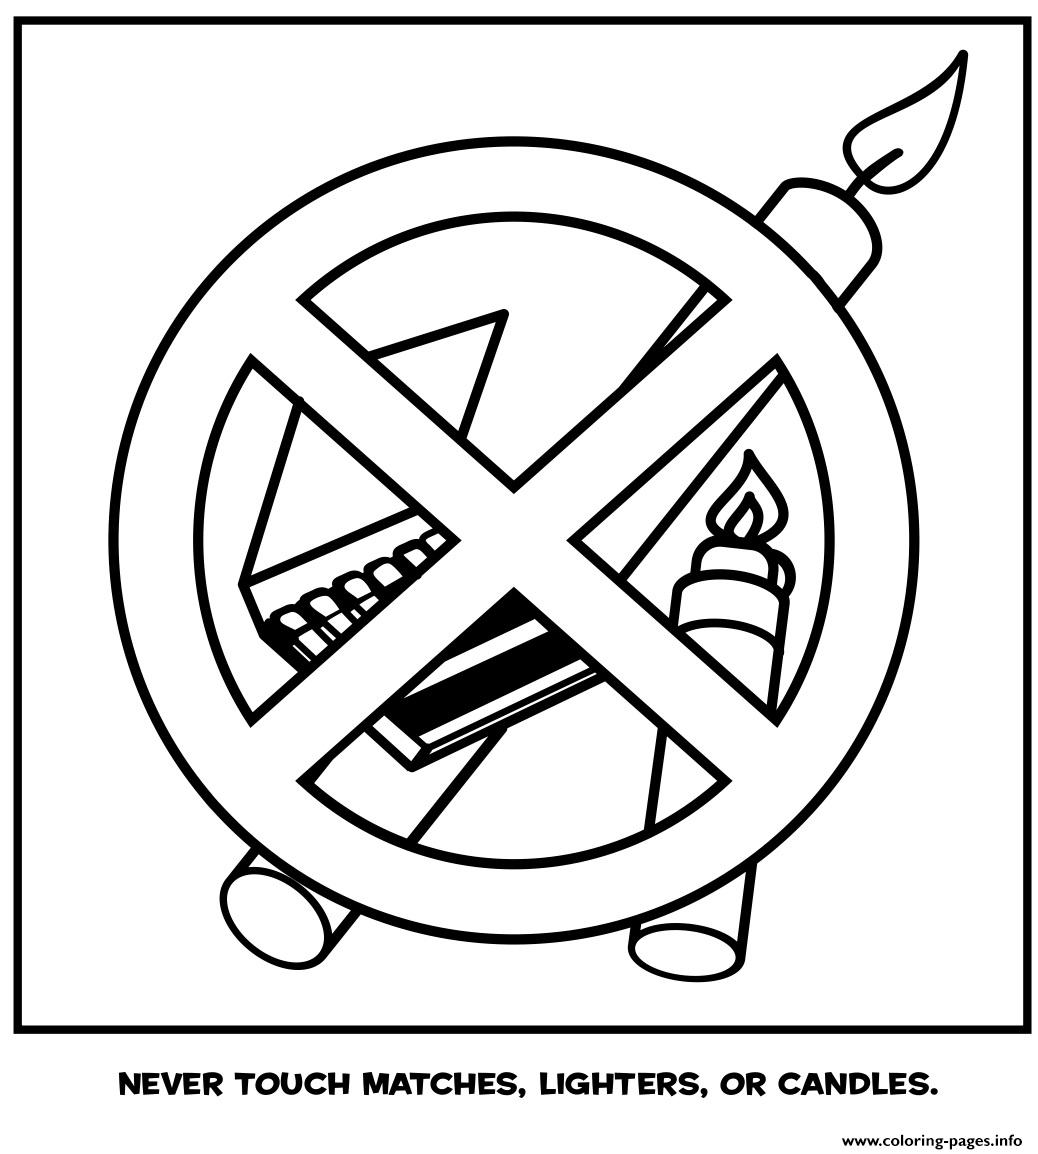 Never Touch Matches Lighters Or Candles coloring